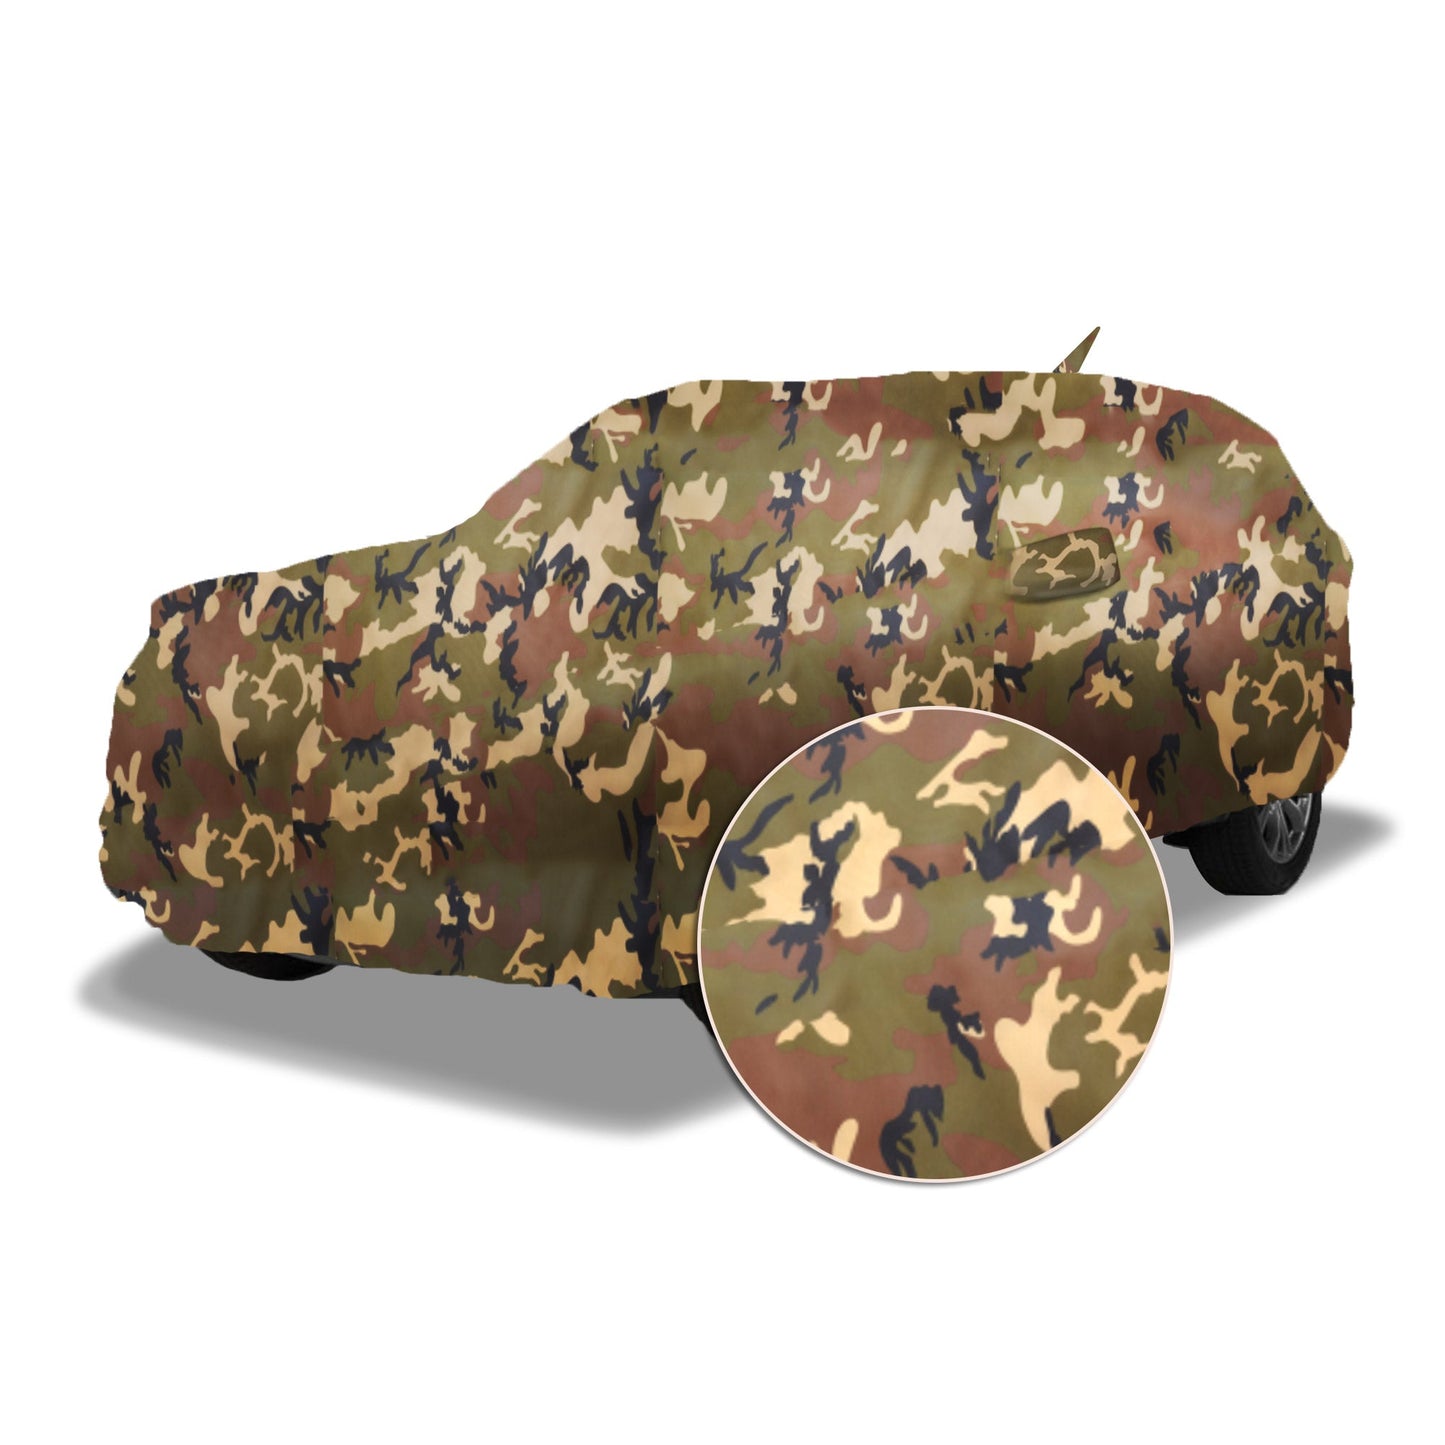 Ascot Chevrolet Enjoy Car Body Cover Extra Strong & Dust Proof Jungle Military Car Cover with UV Proof & Water-Resistant Coating